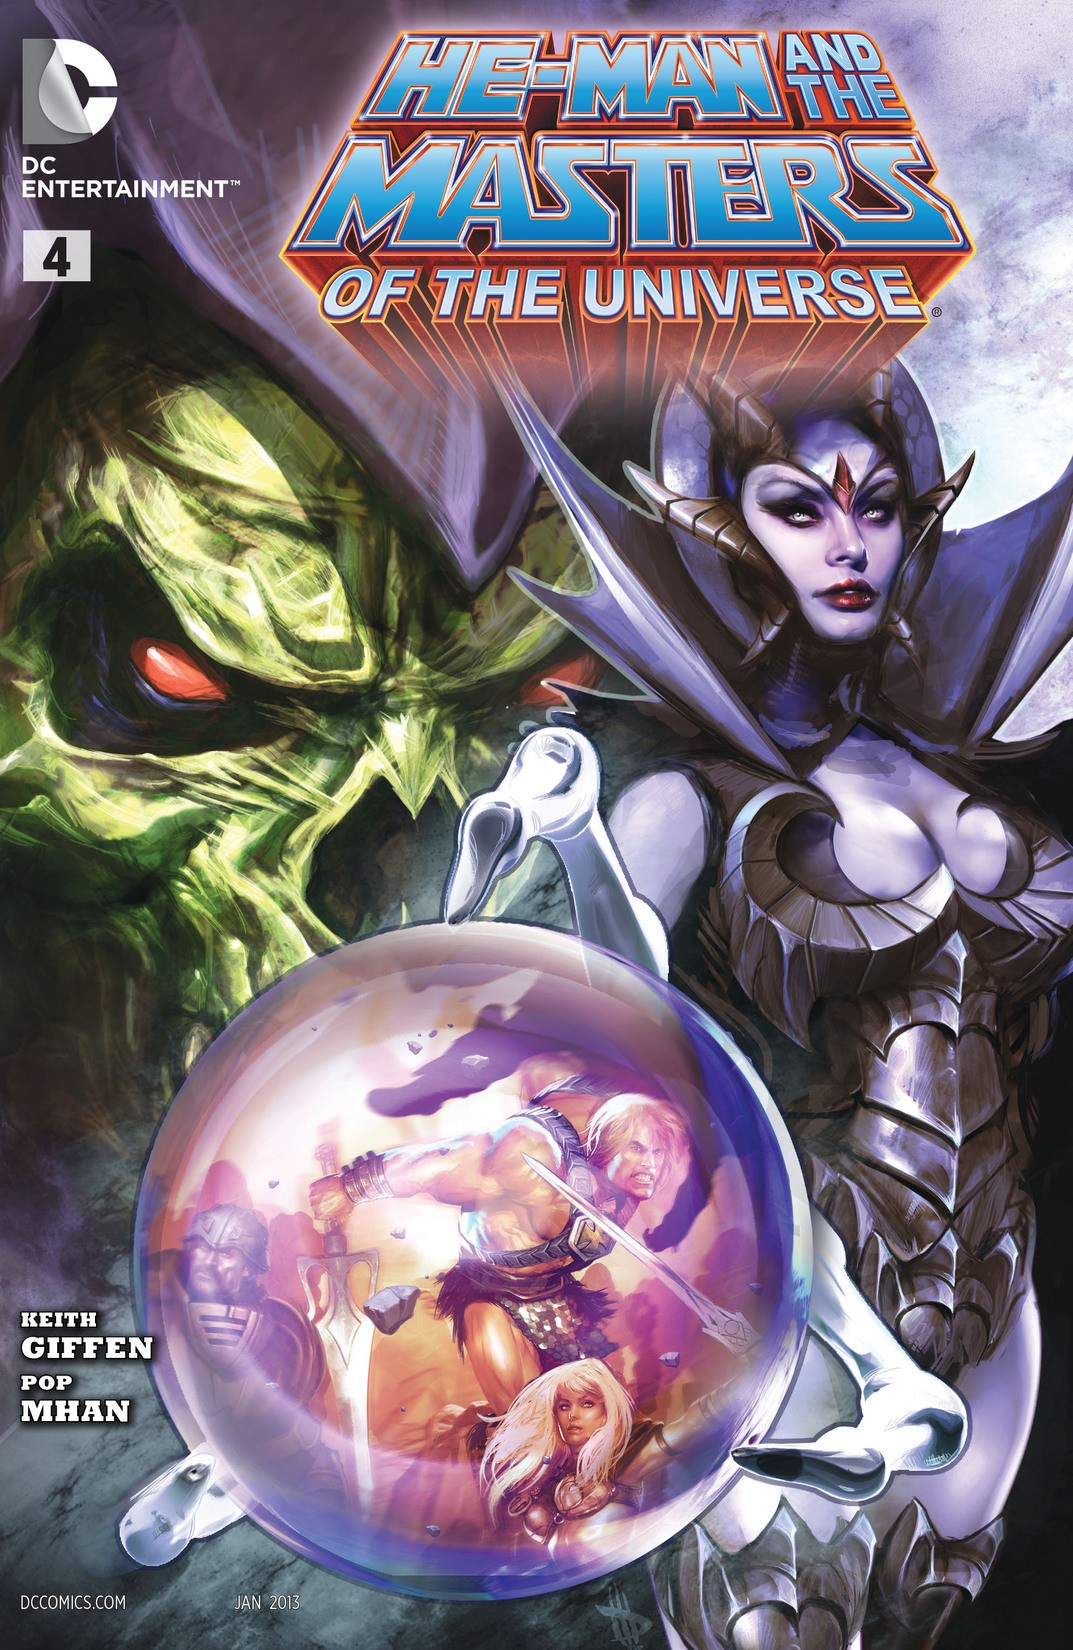 He-Man and the Masters of the Universe Vol. 1 #4